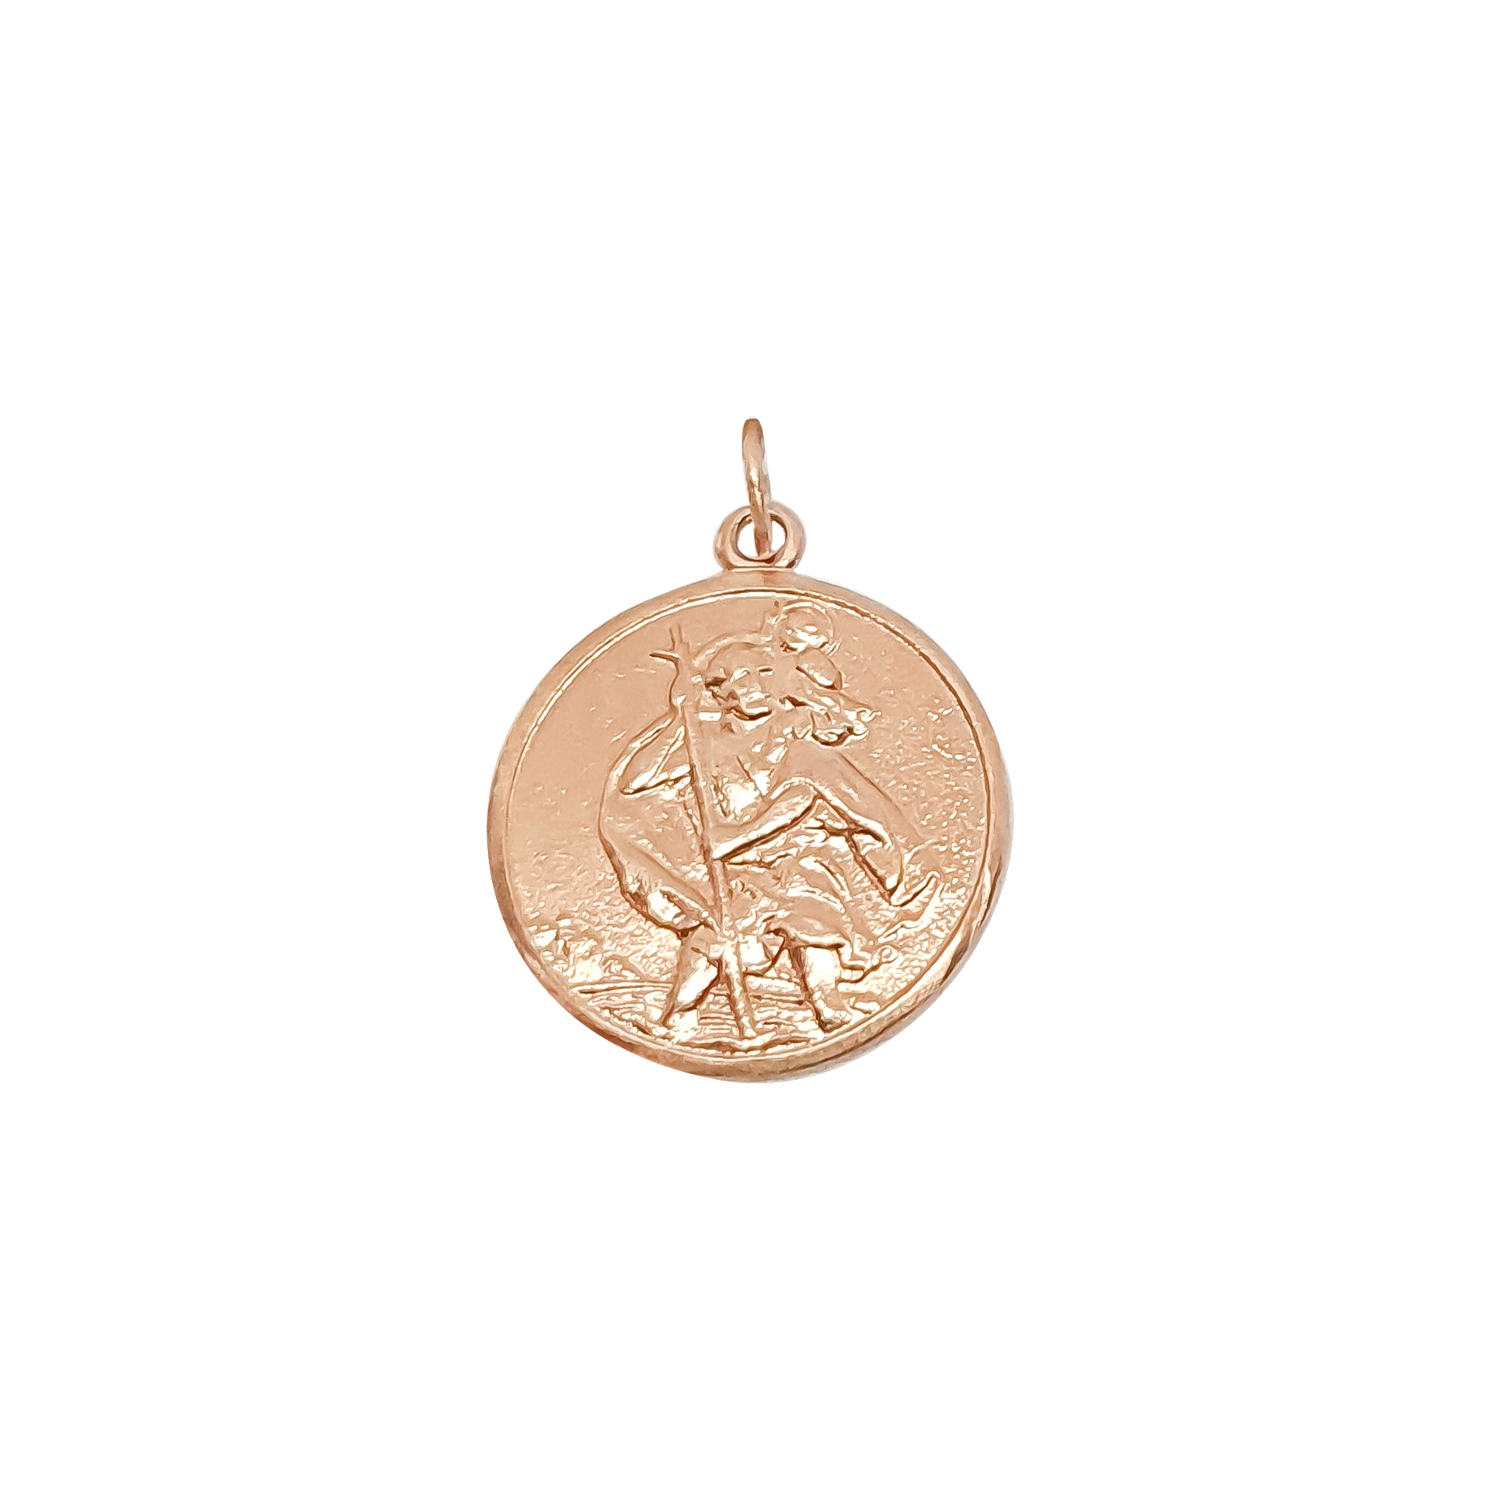 Saint Christopher Round Pendant in 9ct Rose Gold